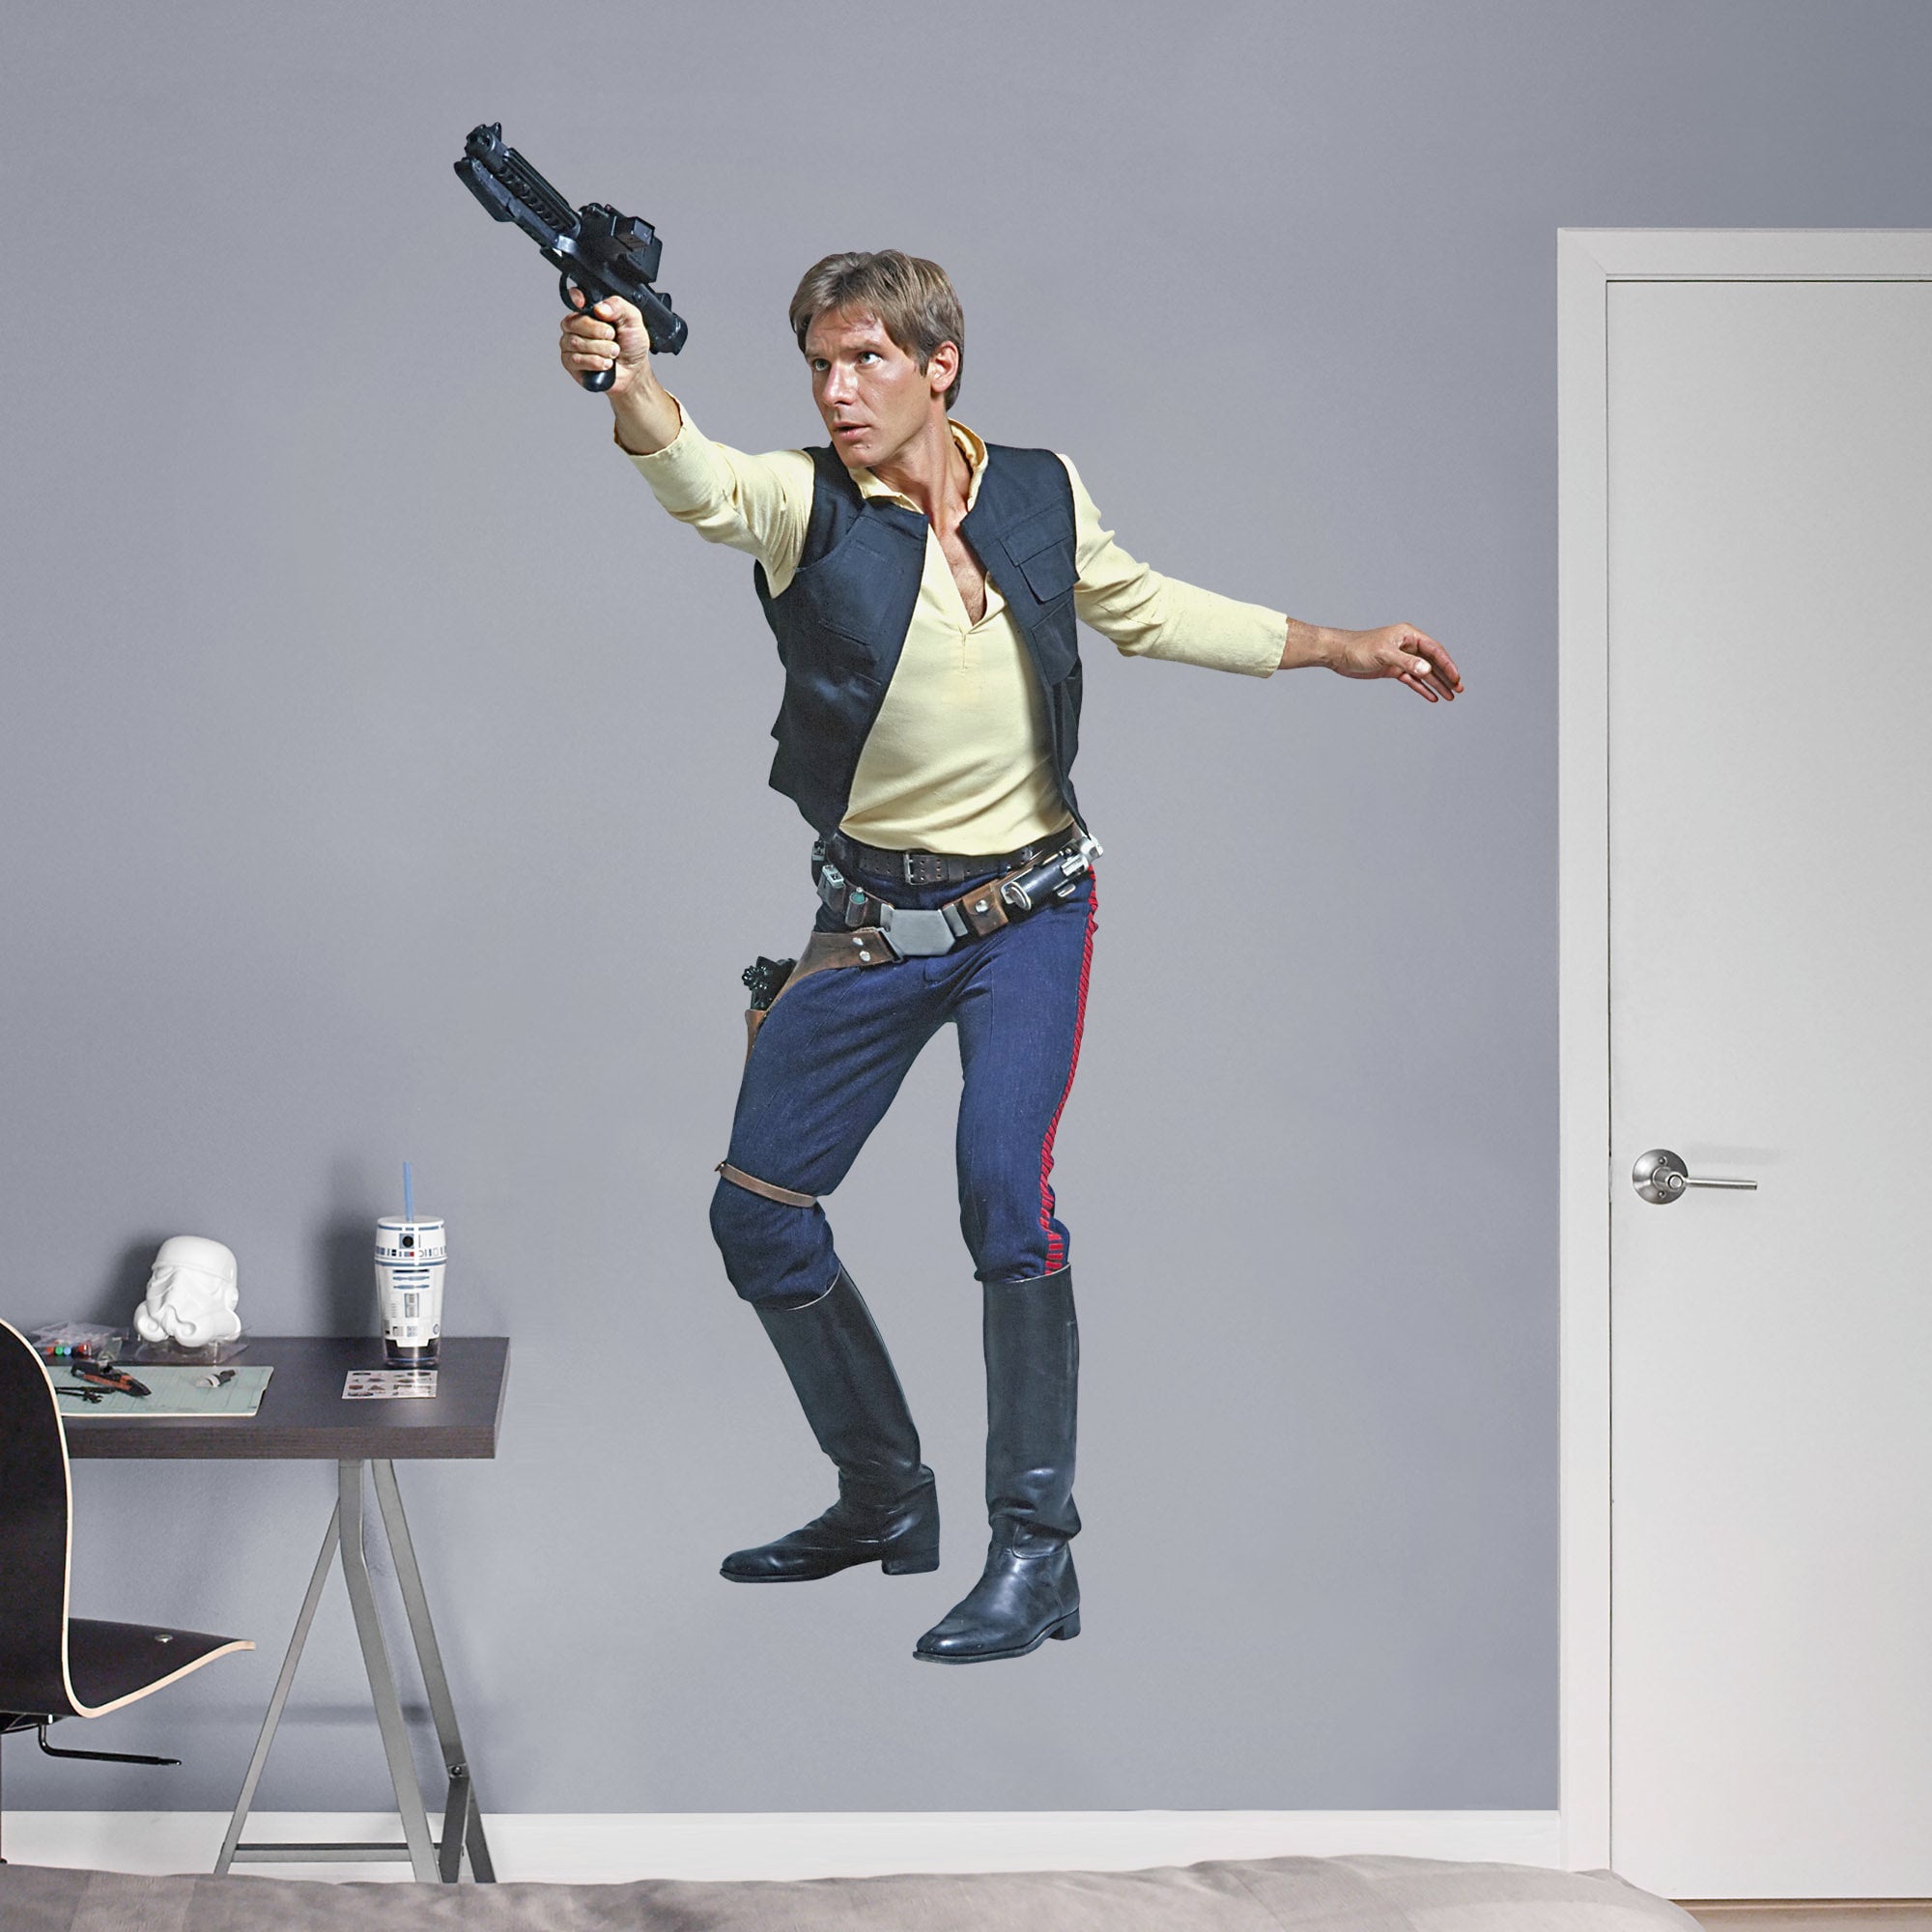 Han Solo - Officially Licensed Removable Wall Decal Life-Size Character + 2 Decals (48"W x 77"H) by Fathead | Vinyl